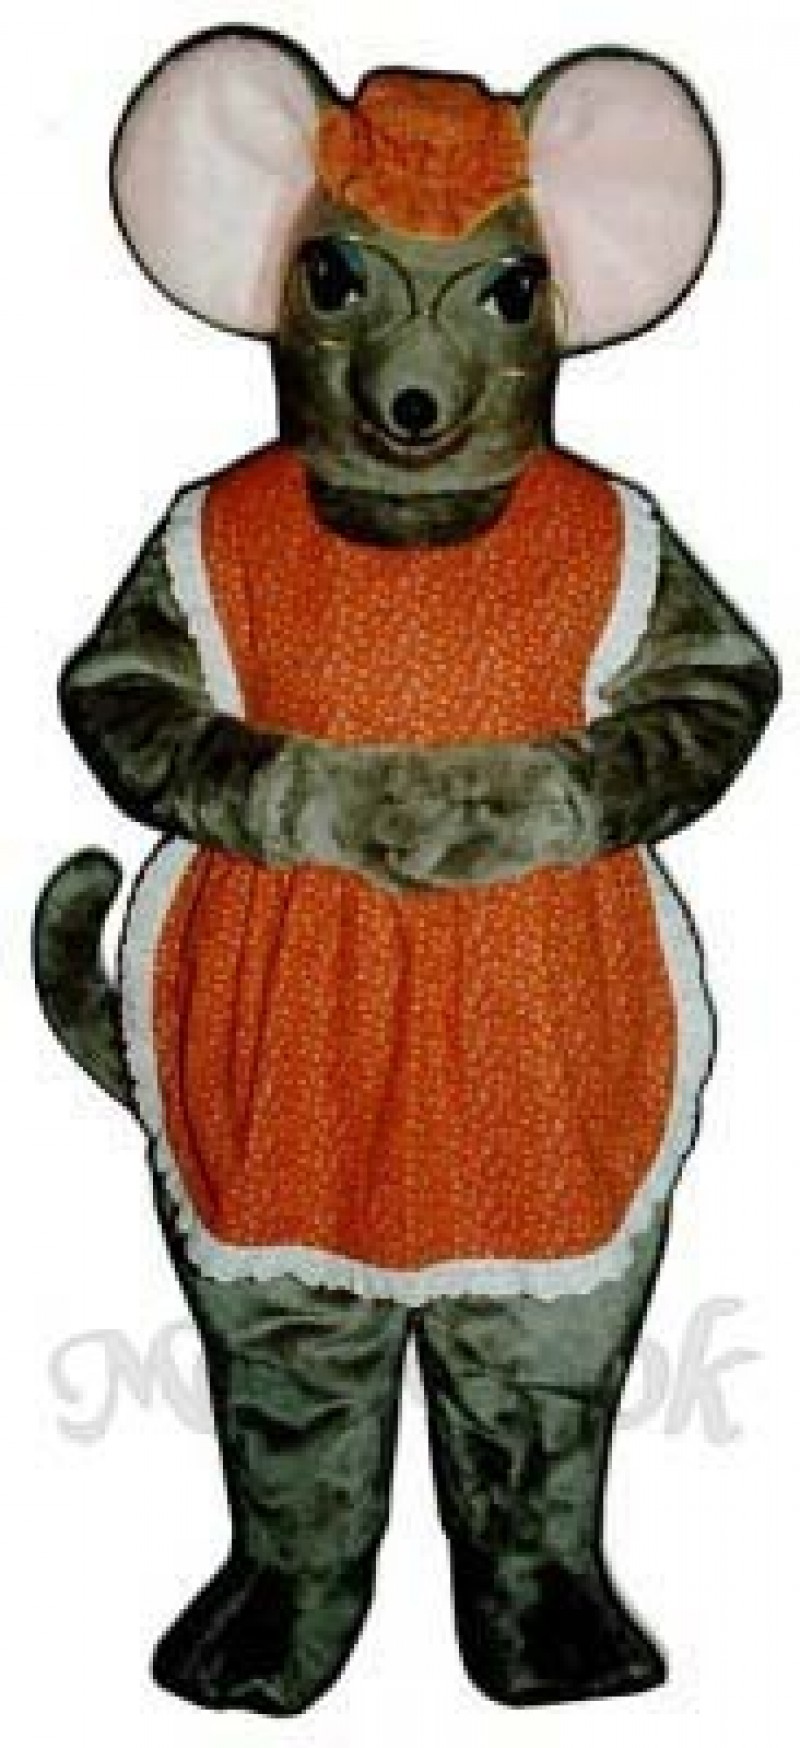 Granny Mouse with Glasses, Hat & Apron Mascot Costume